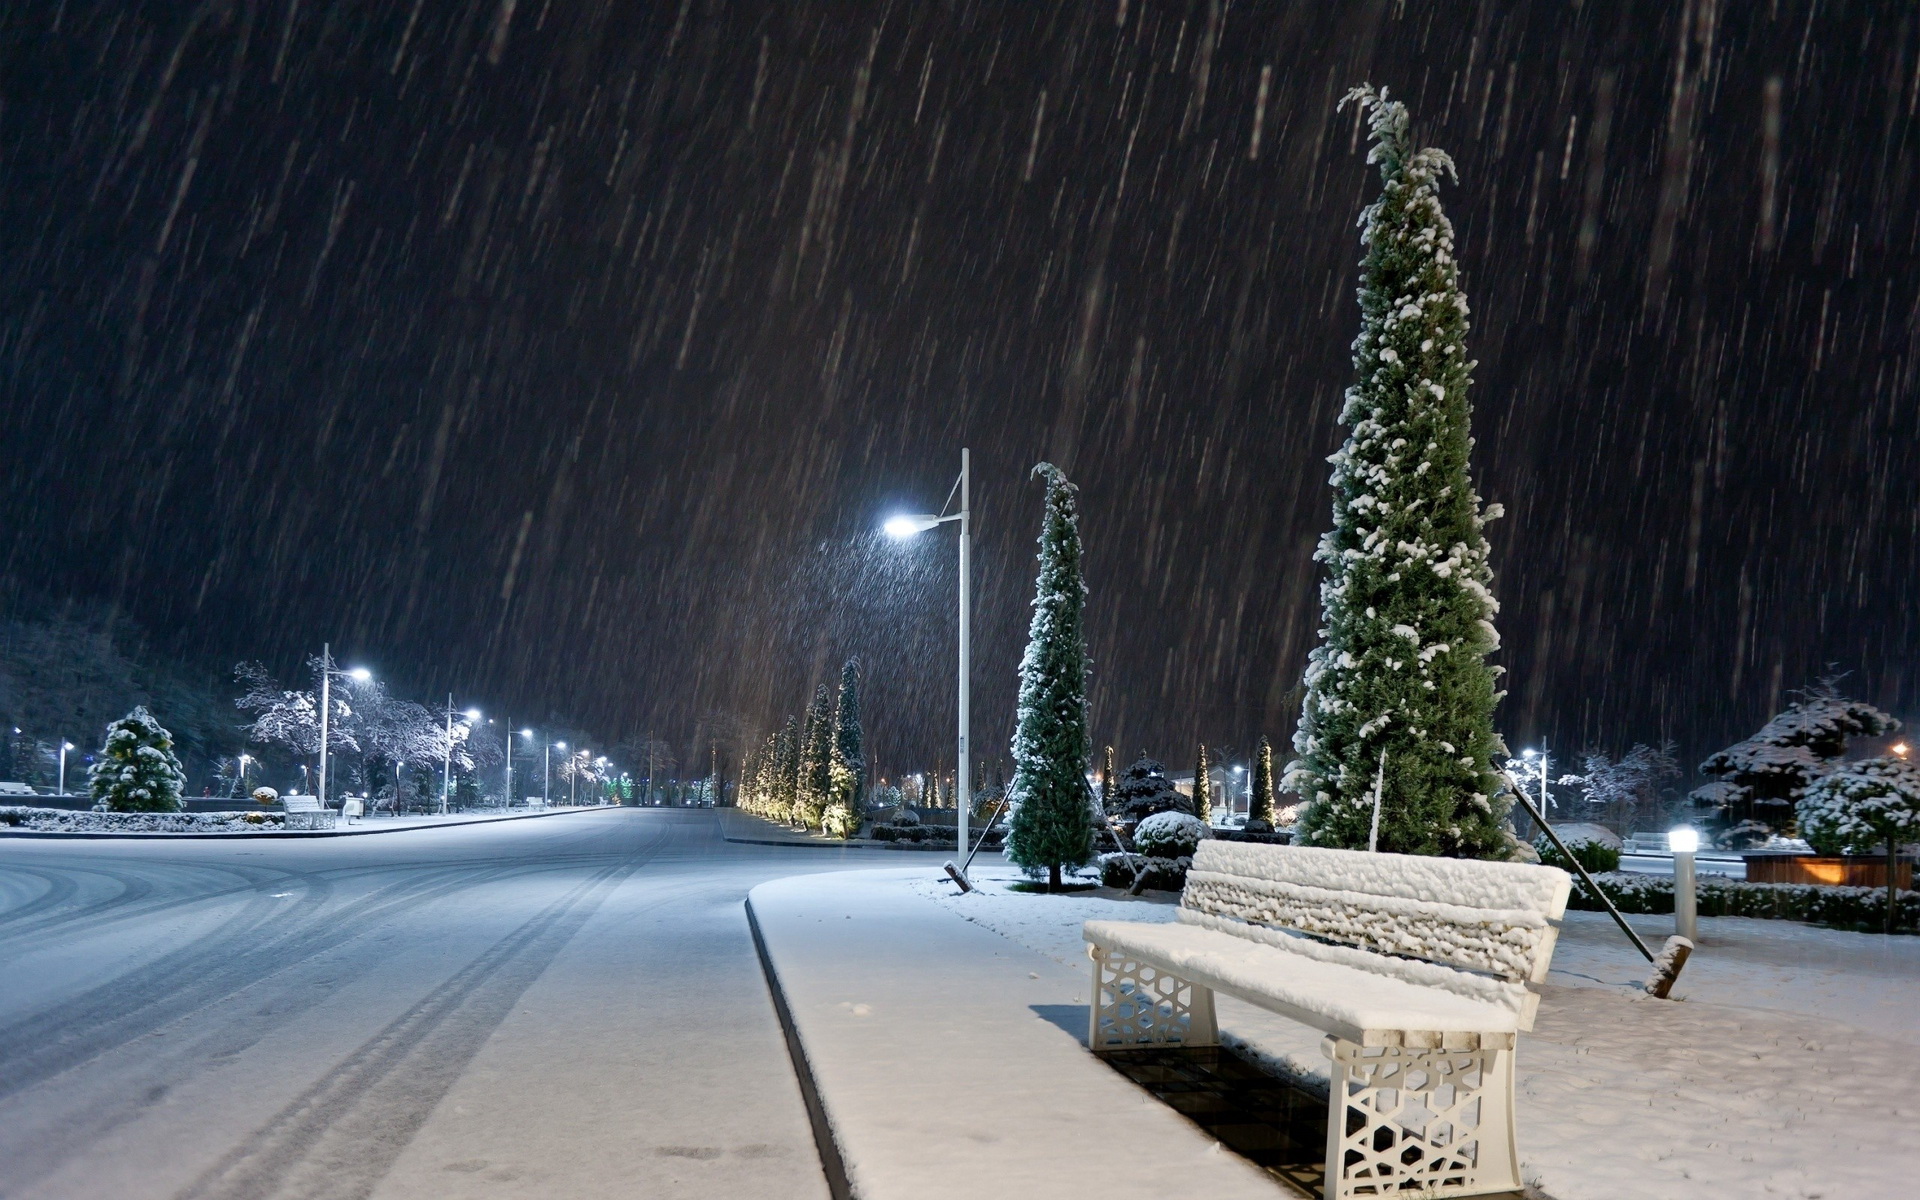 nature, Landscapes, Roads, Winter, Snow, Snowing, Bench, Night, Lights, Lamp, Post, Storm, Blizzard, Cities, Seasons Wallpaper